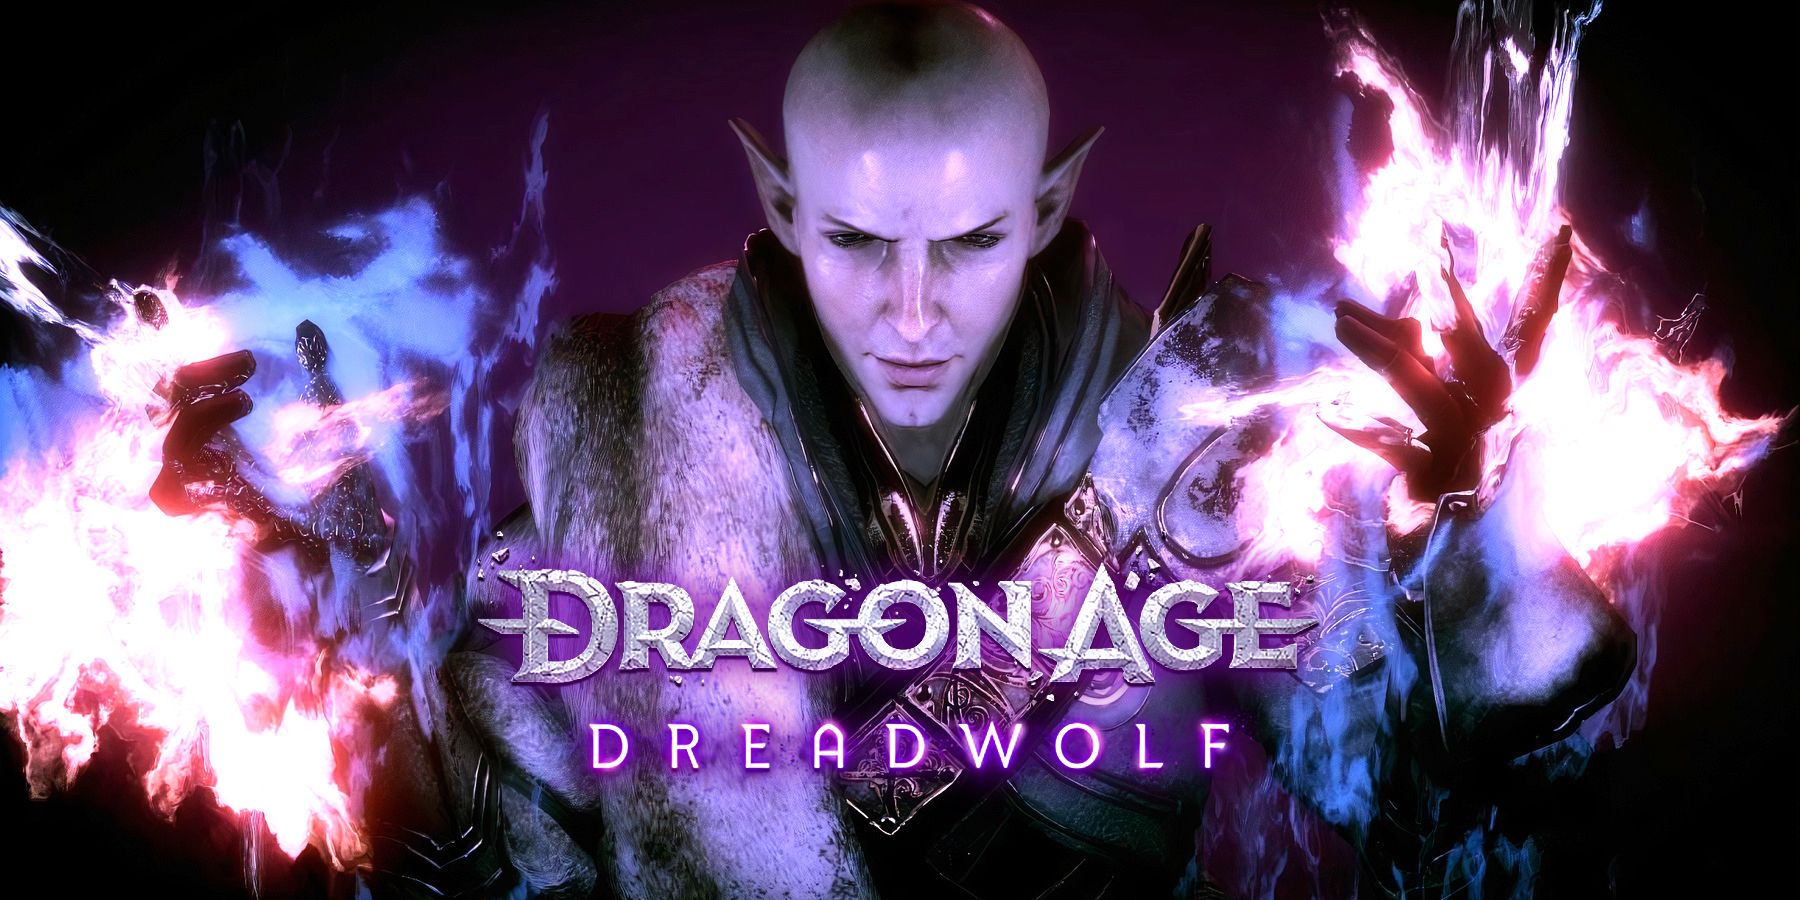 Dragon Age Dreadwolf logo with Solas casting magic in the background